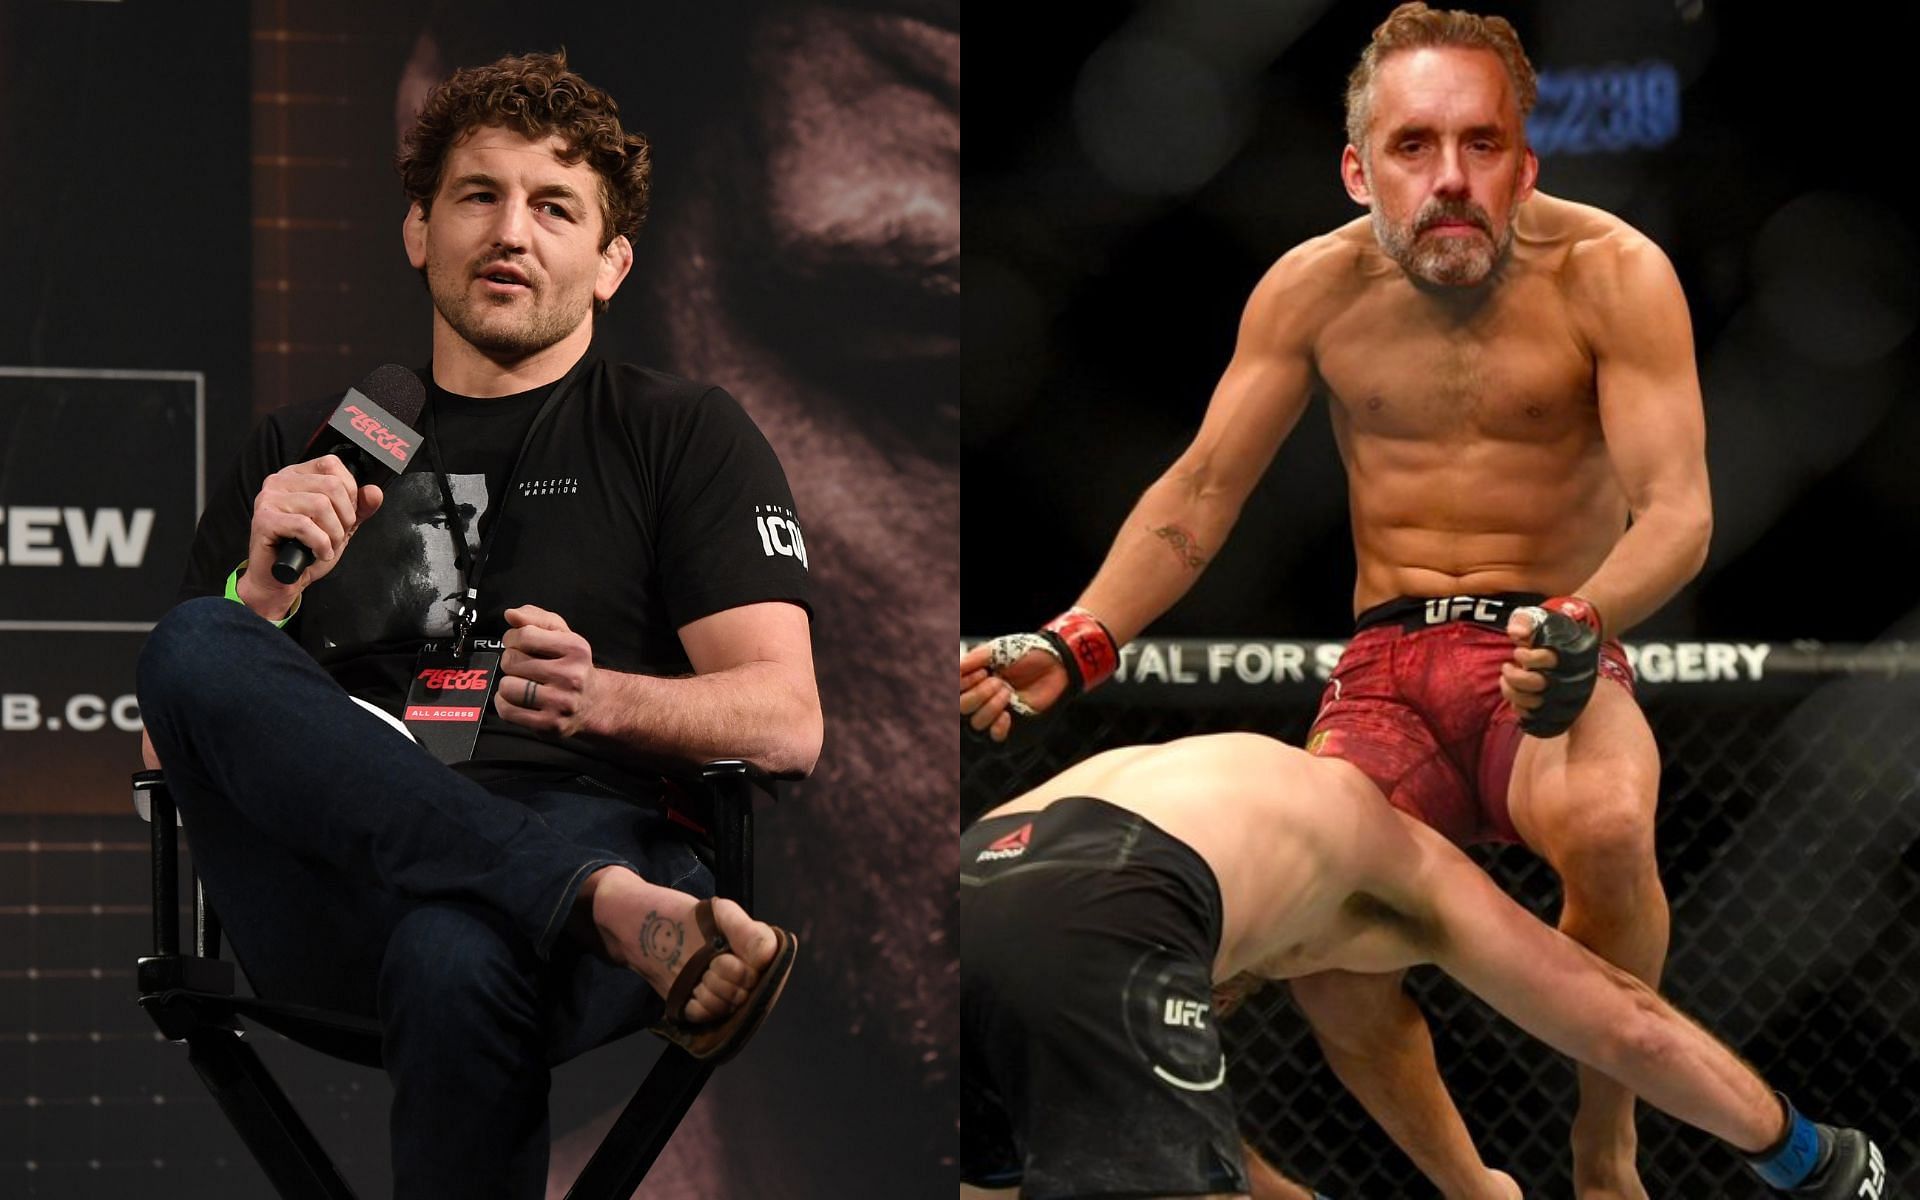 Ben Askren (left) and Jordan B Peterson photoshopped onto Jorge Masvidal  (right) (Image credits @The_Q_B on Twitter and Getty Images)